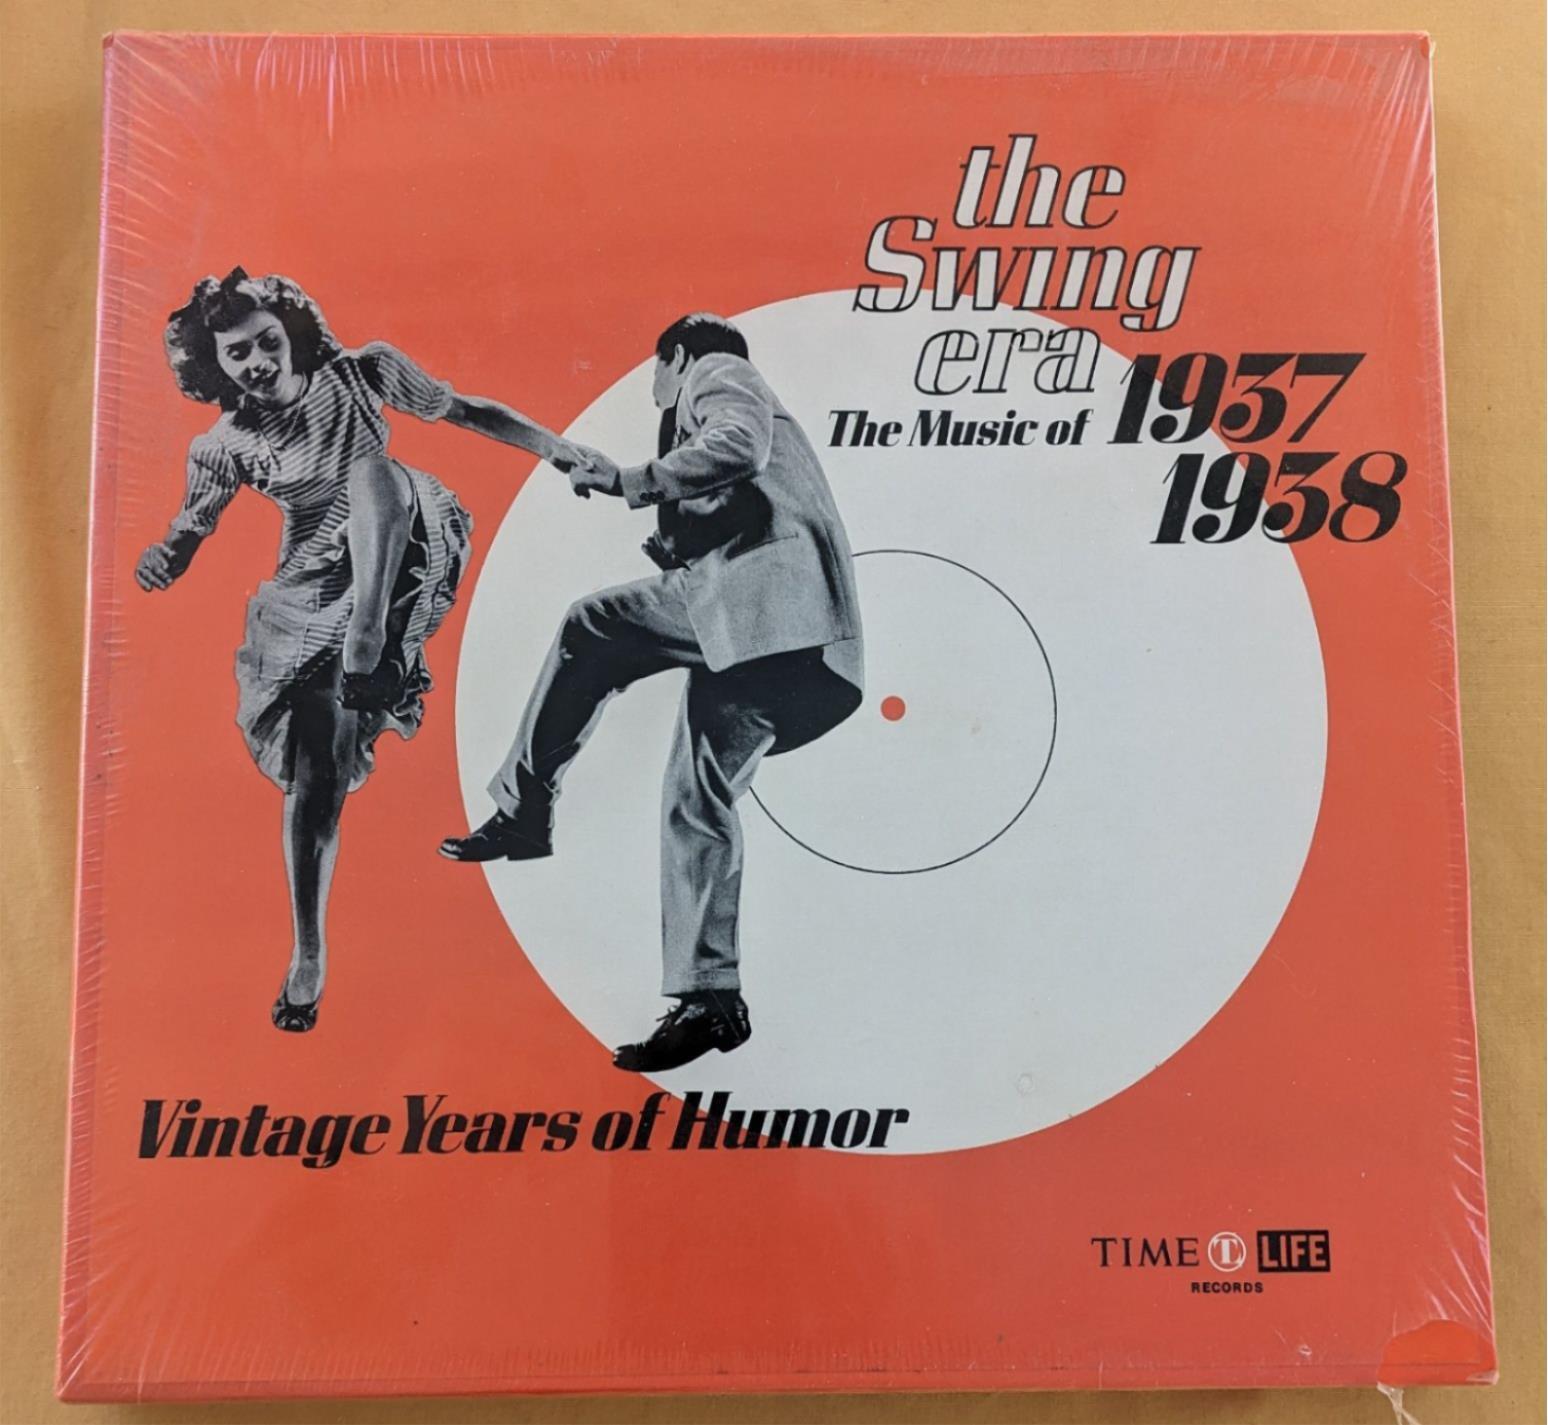 Vintage Time Life 3 Record Set The Swing Era The Music of 1937-1938 New Sealed